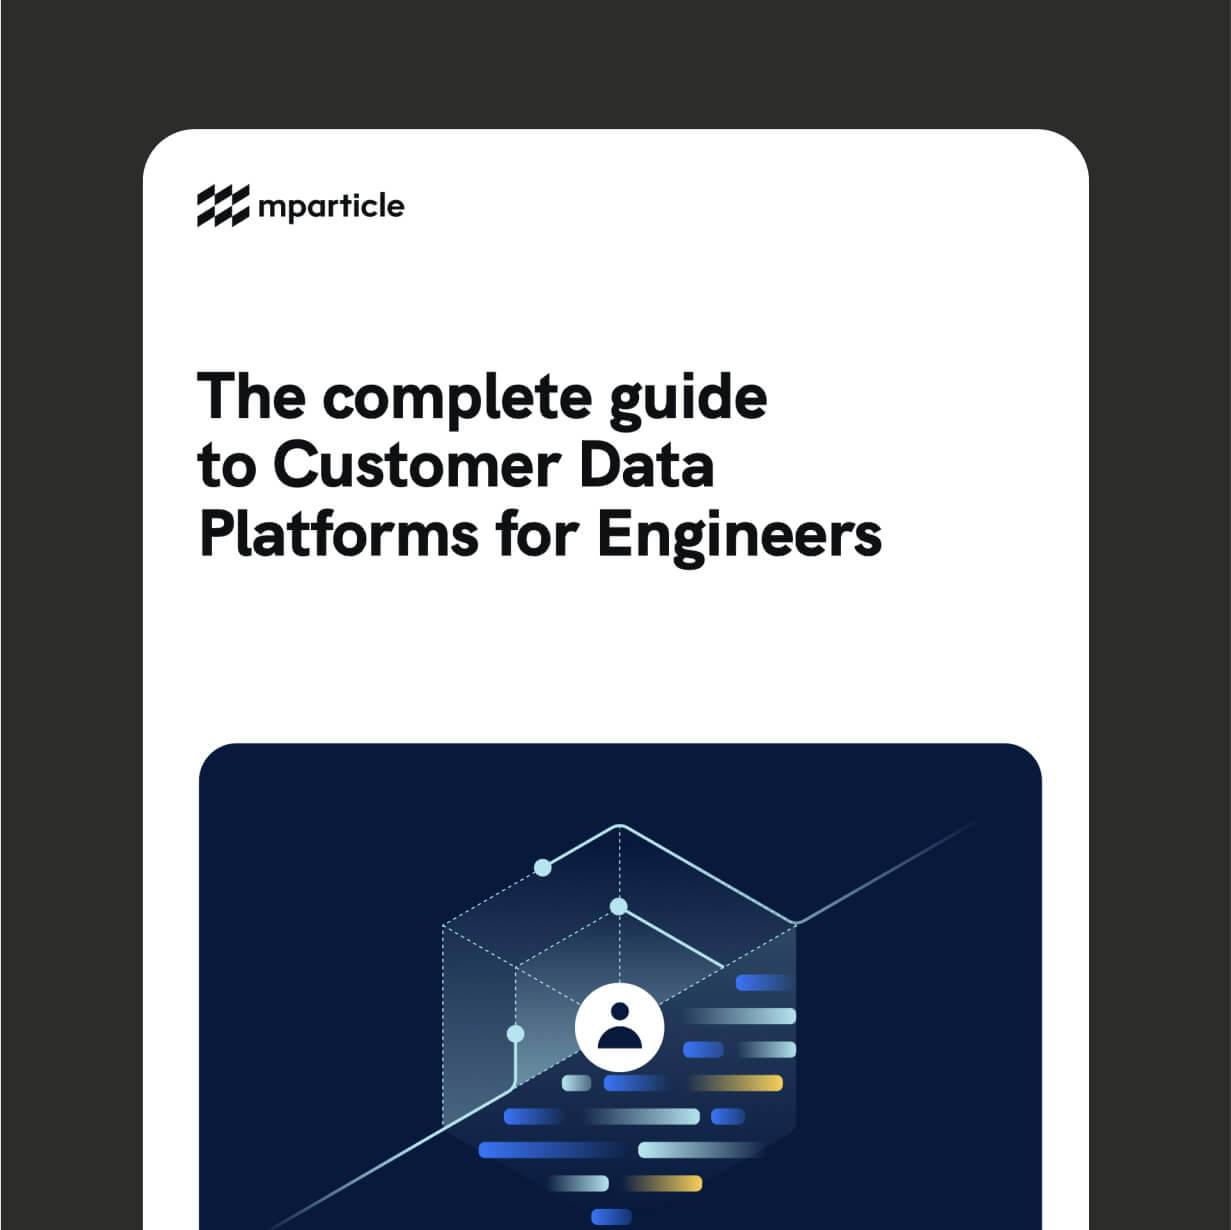 The complete guide to Customer Data Platforms for engineers